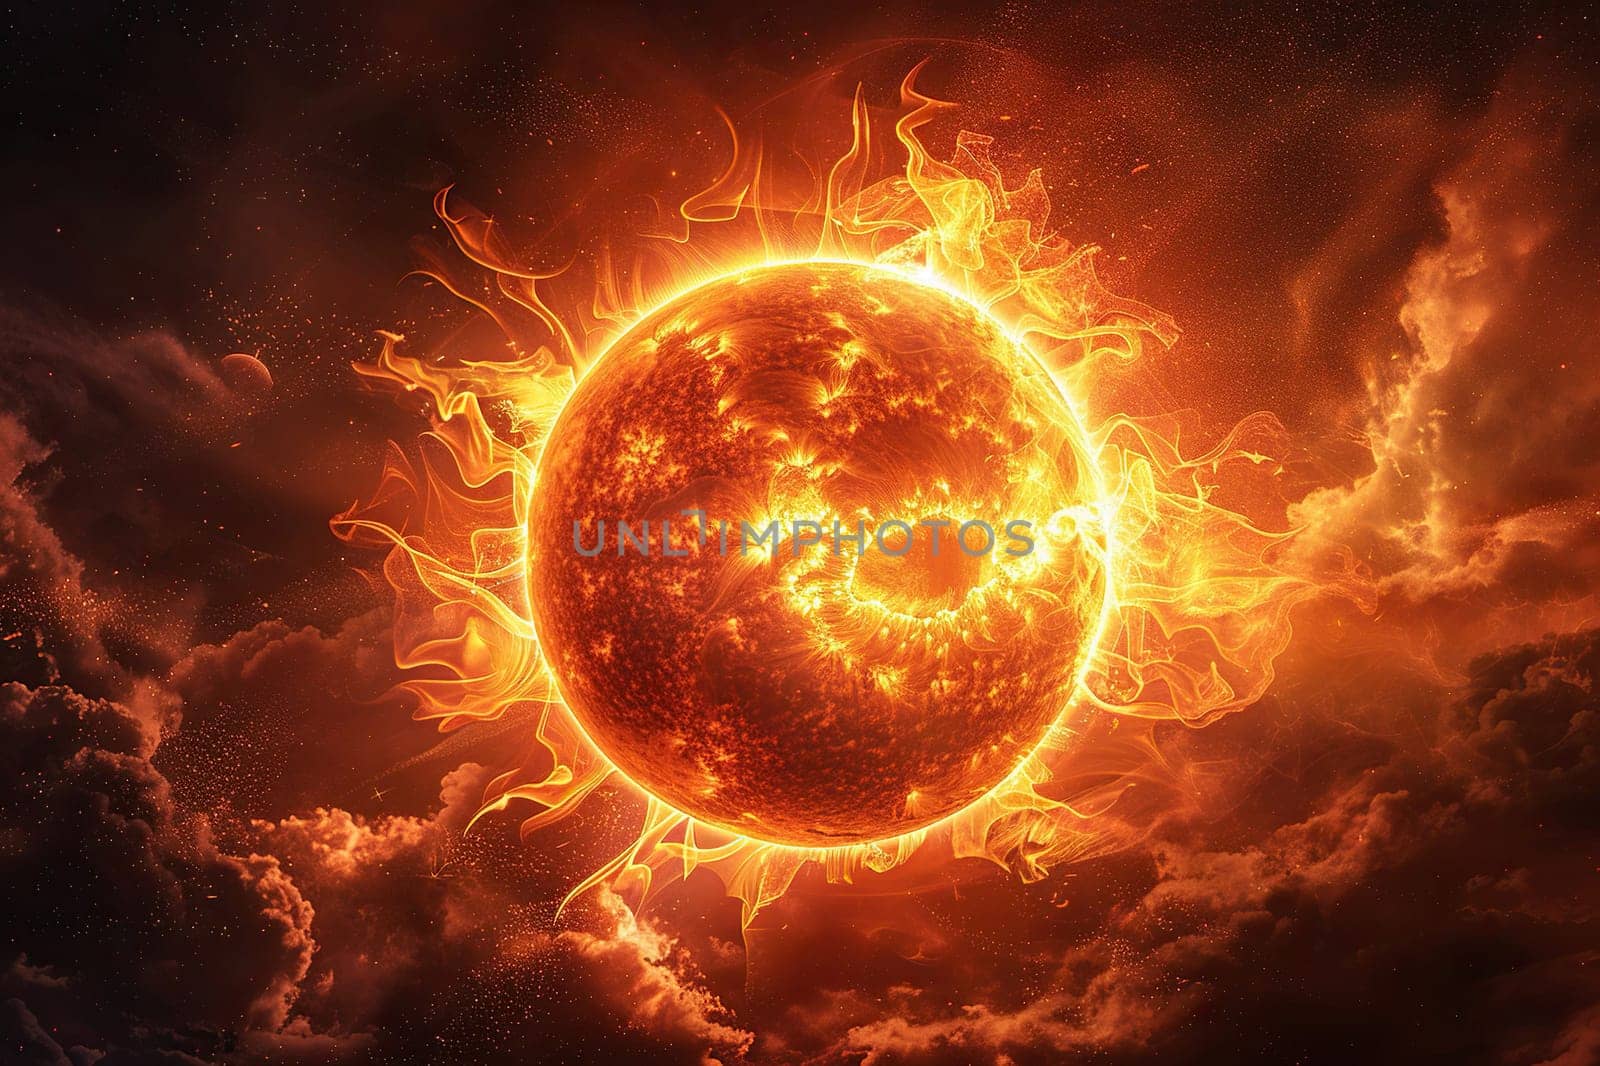 Abstract image of the sun in space with bright rays and flares on it. Solar energy concept.